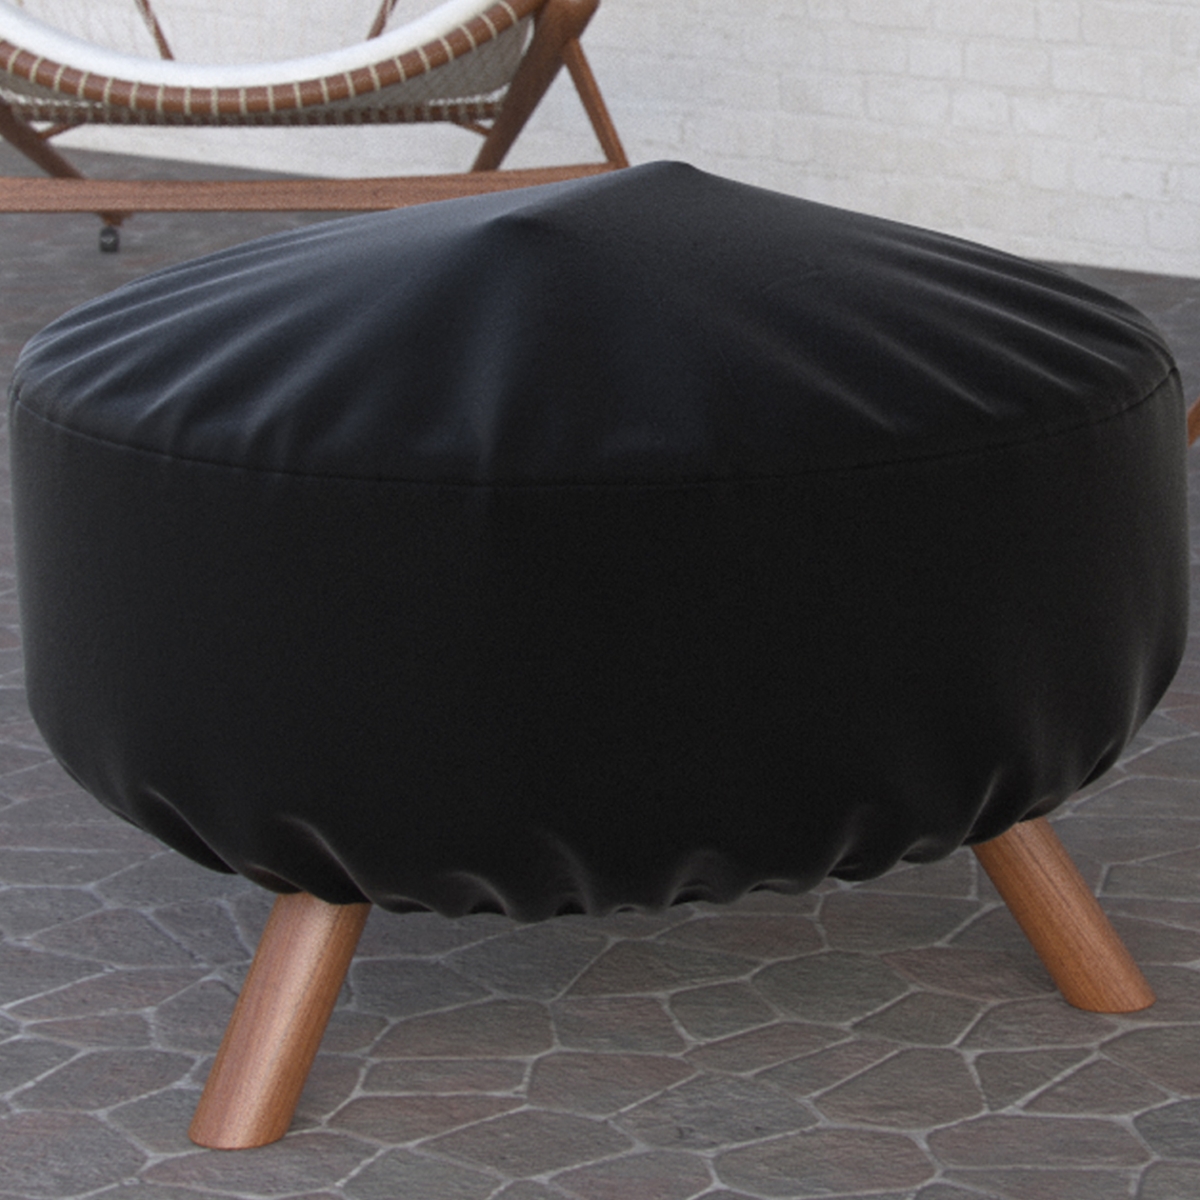 Lrfp5528 32 In. Black Heavy Duty Durable & Water Resistant Round Fire Pit Cover